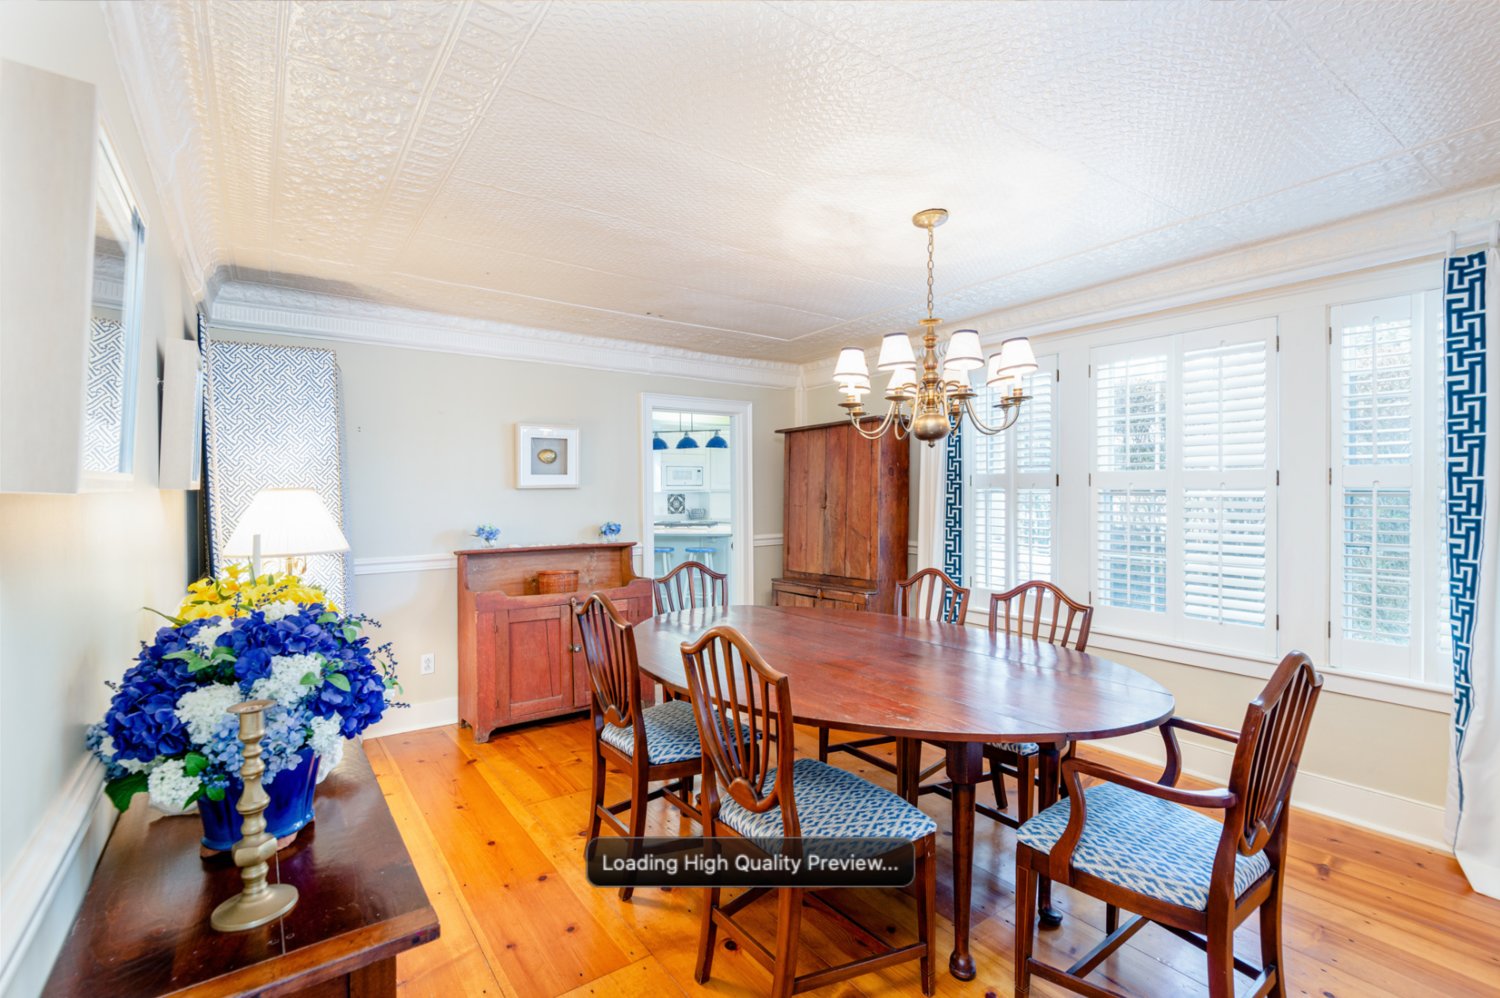 The formal dining room just off the kitchen has wide plank floors and plenty of windows that let in an abundance of natural light.